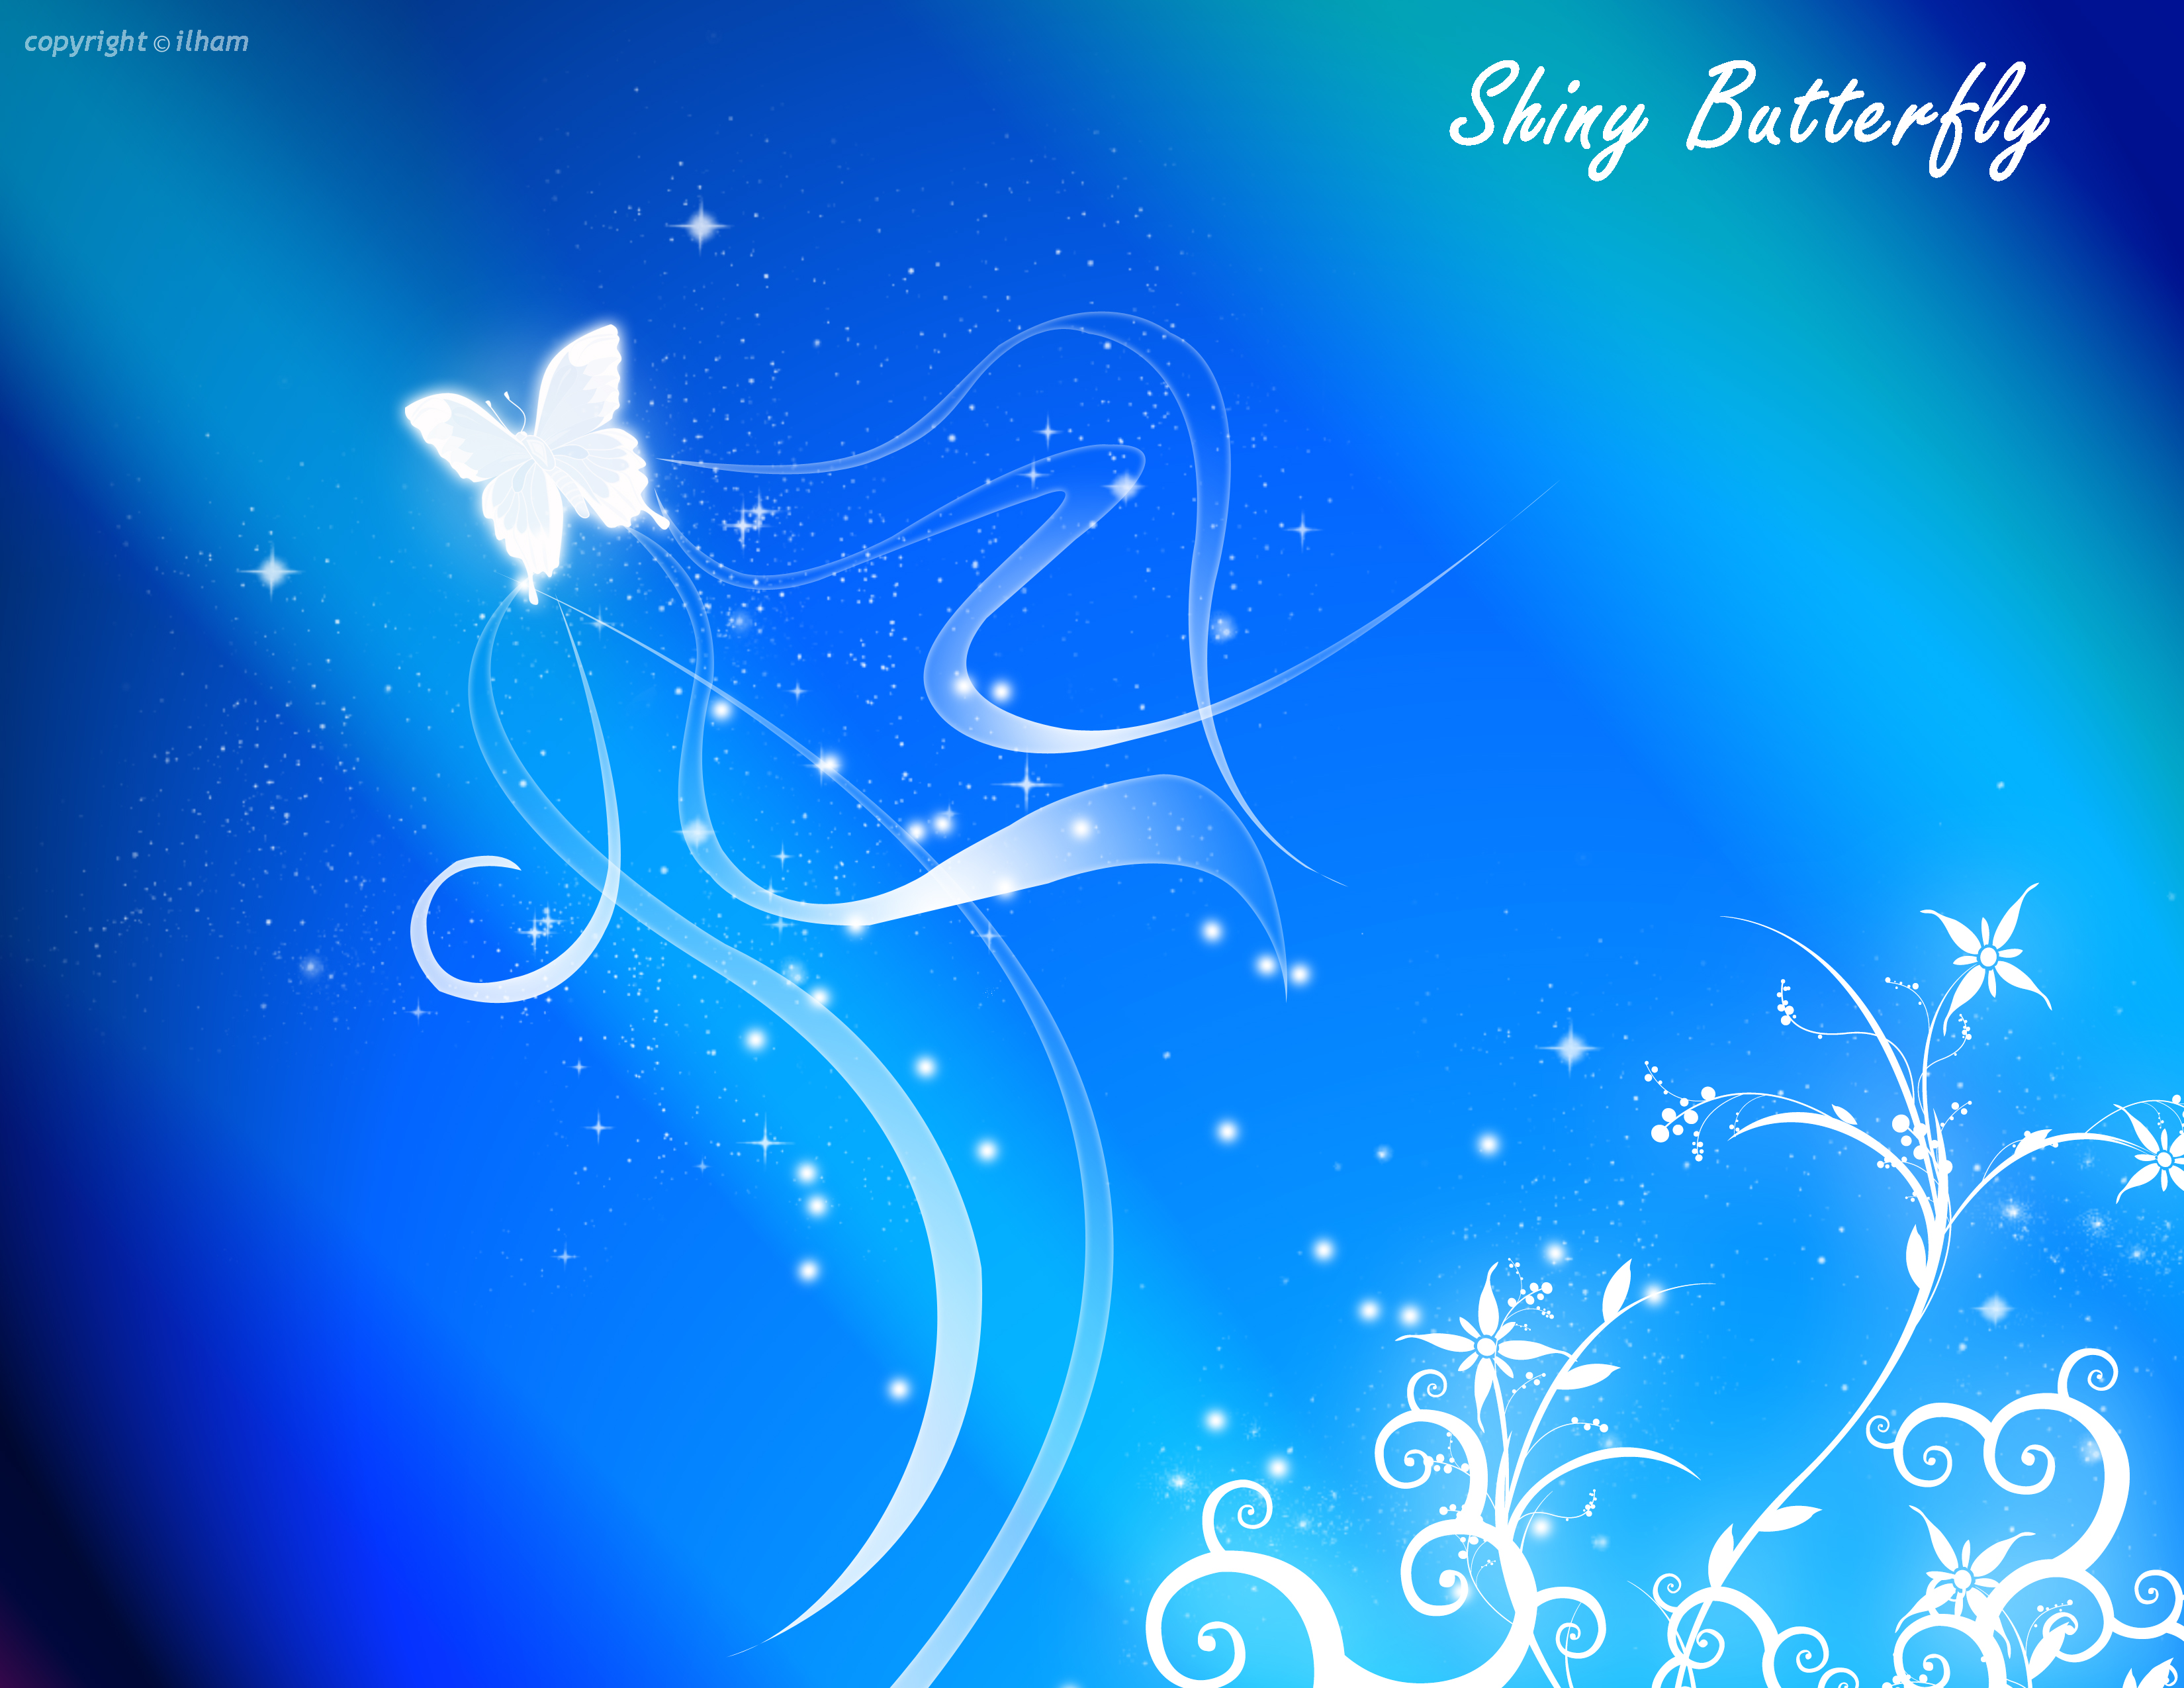 Blue Wallpapers Designs